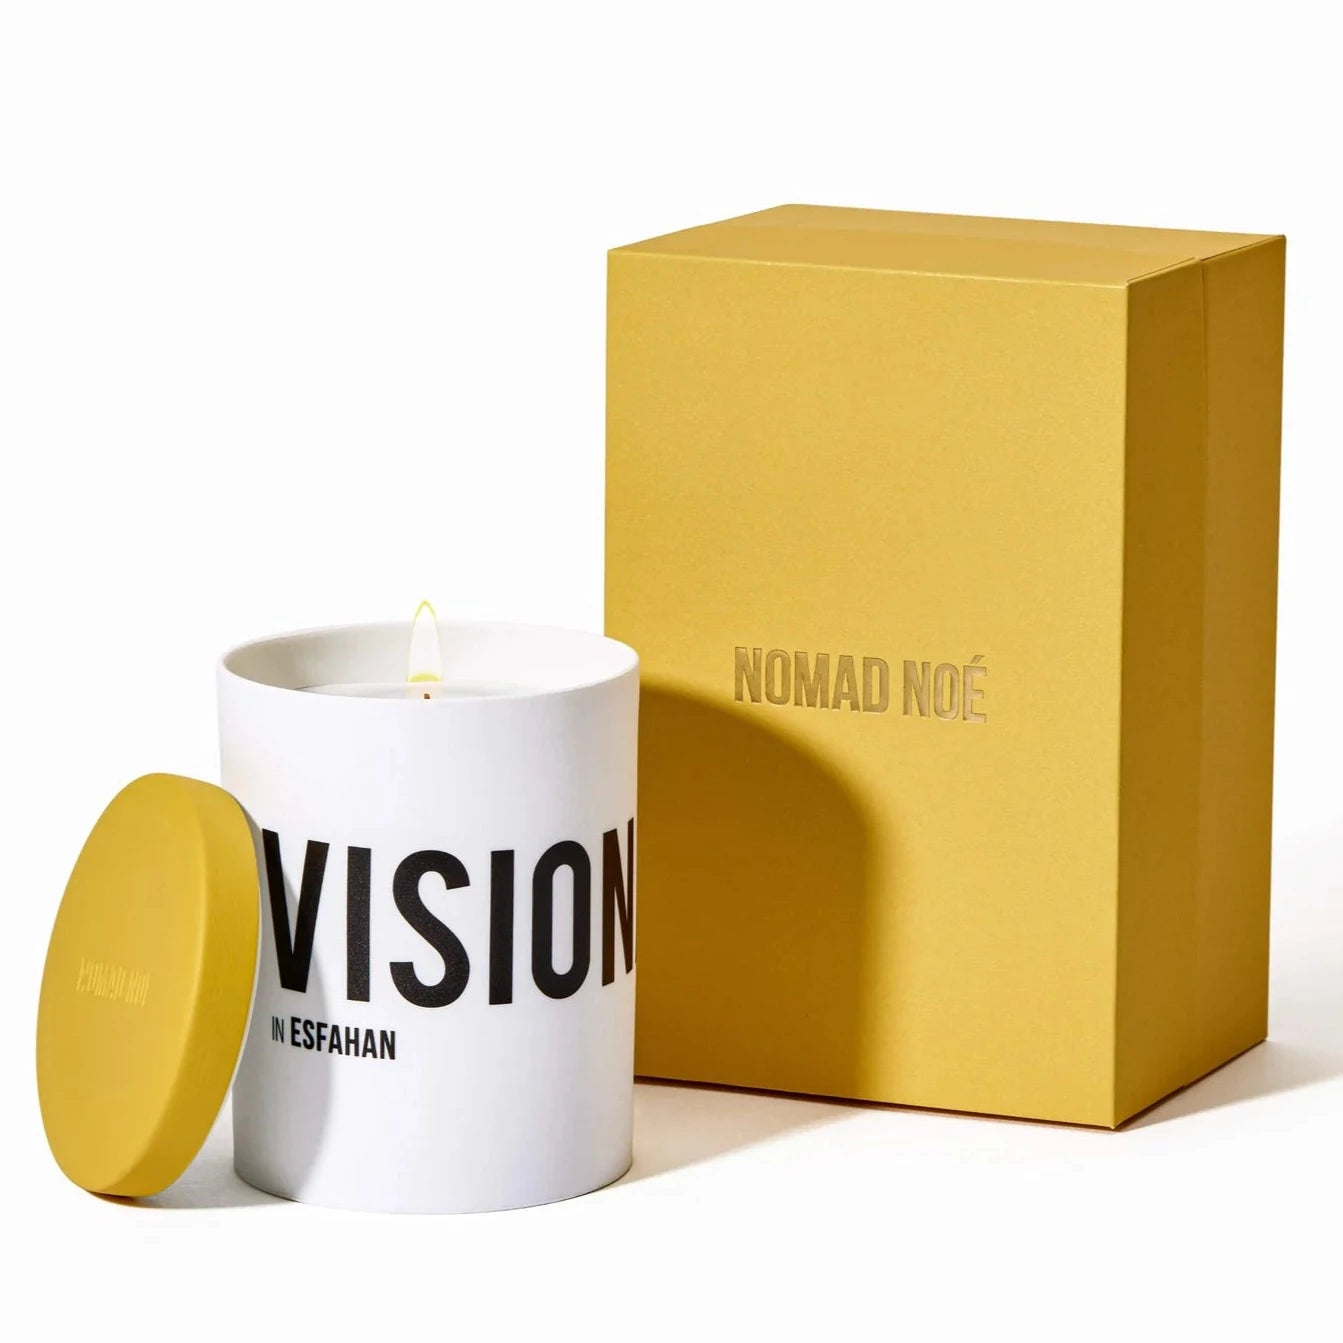 Nomad Noe Candle - VISIONARY in Esfahan